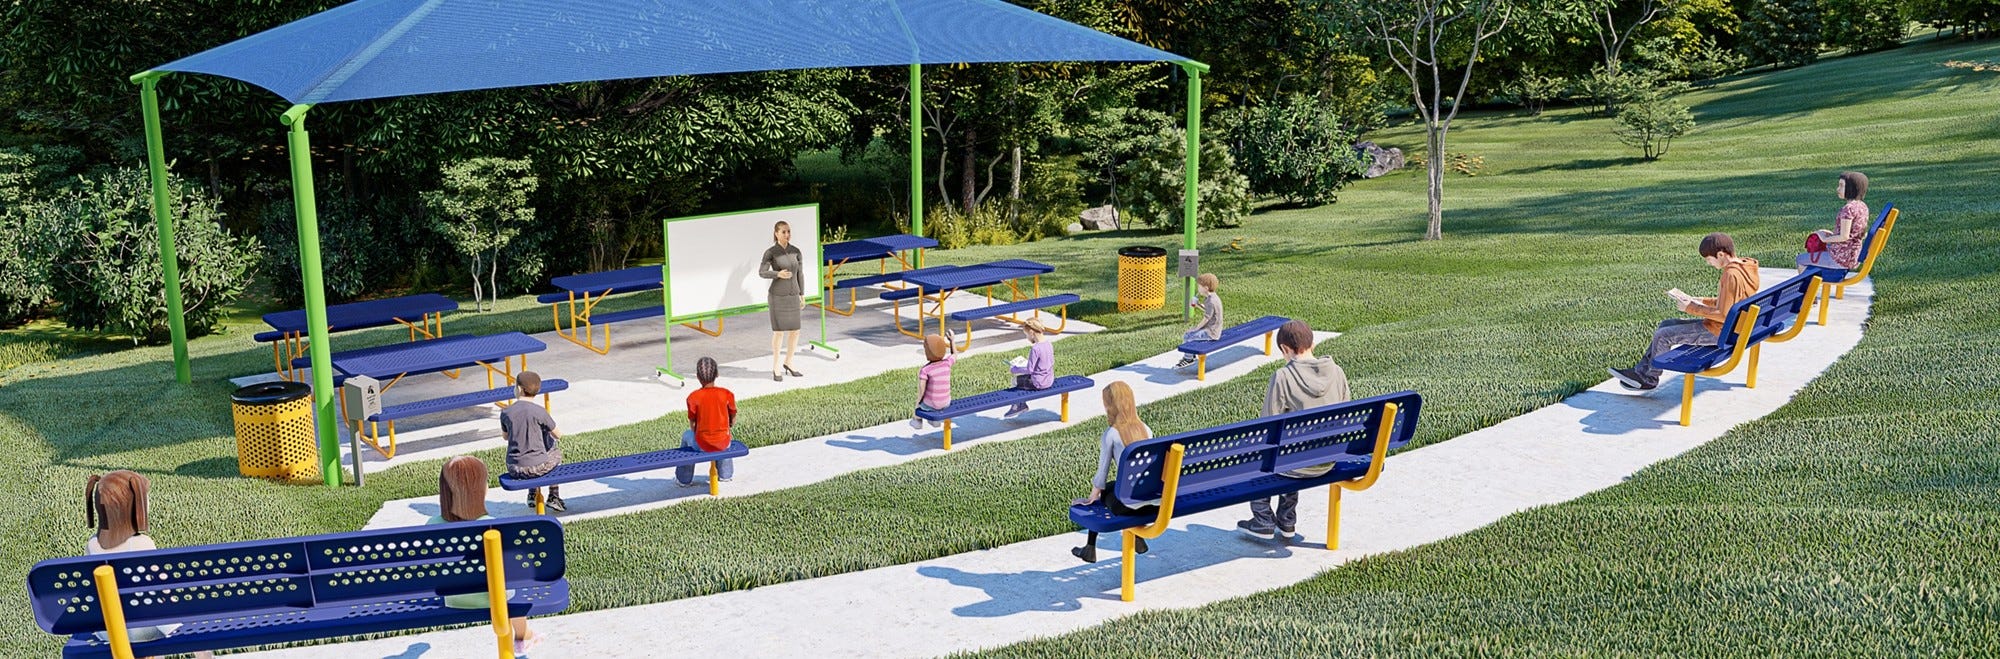 The Surprising Benefits of Outdoor Classrooms